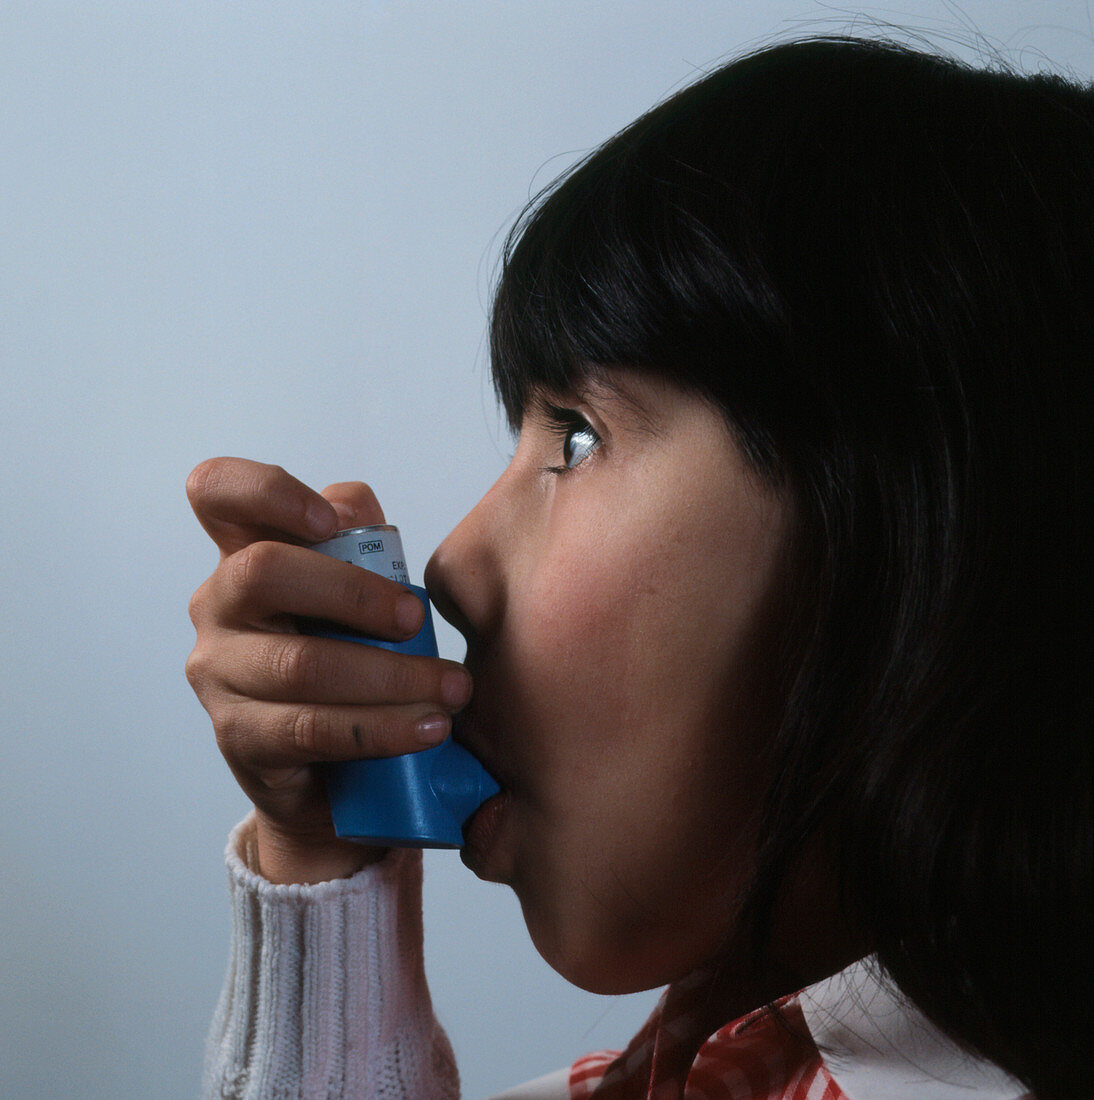 Young child using Brycanyl inhaler for asthma